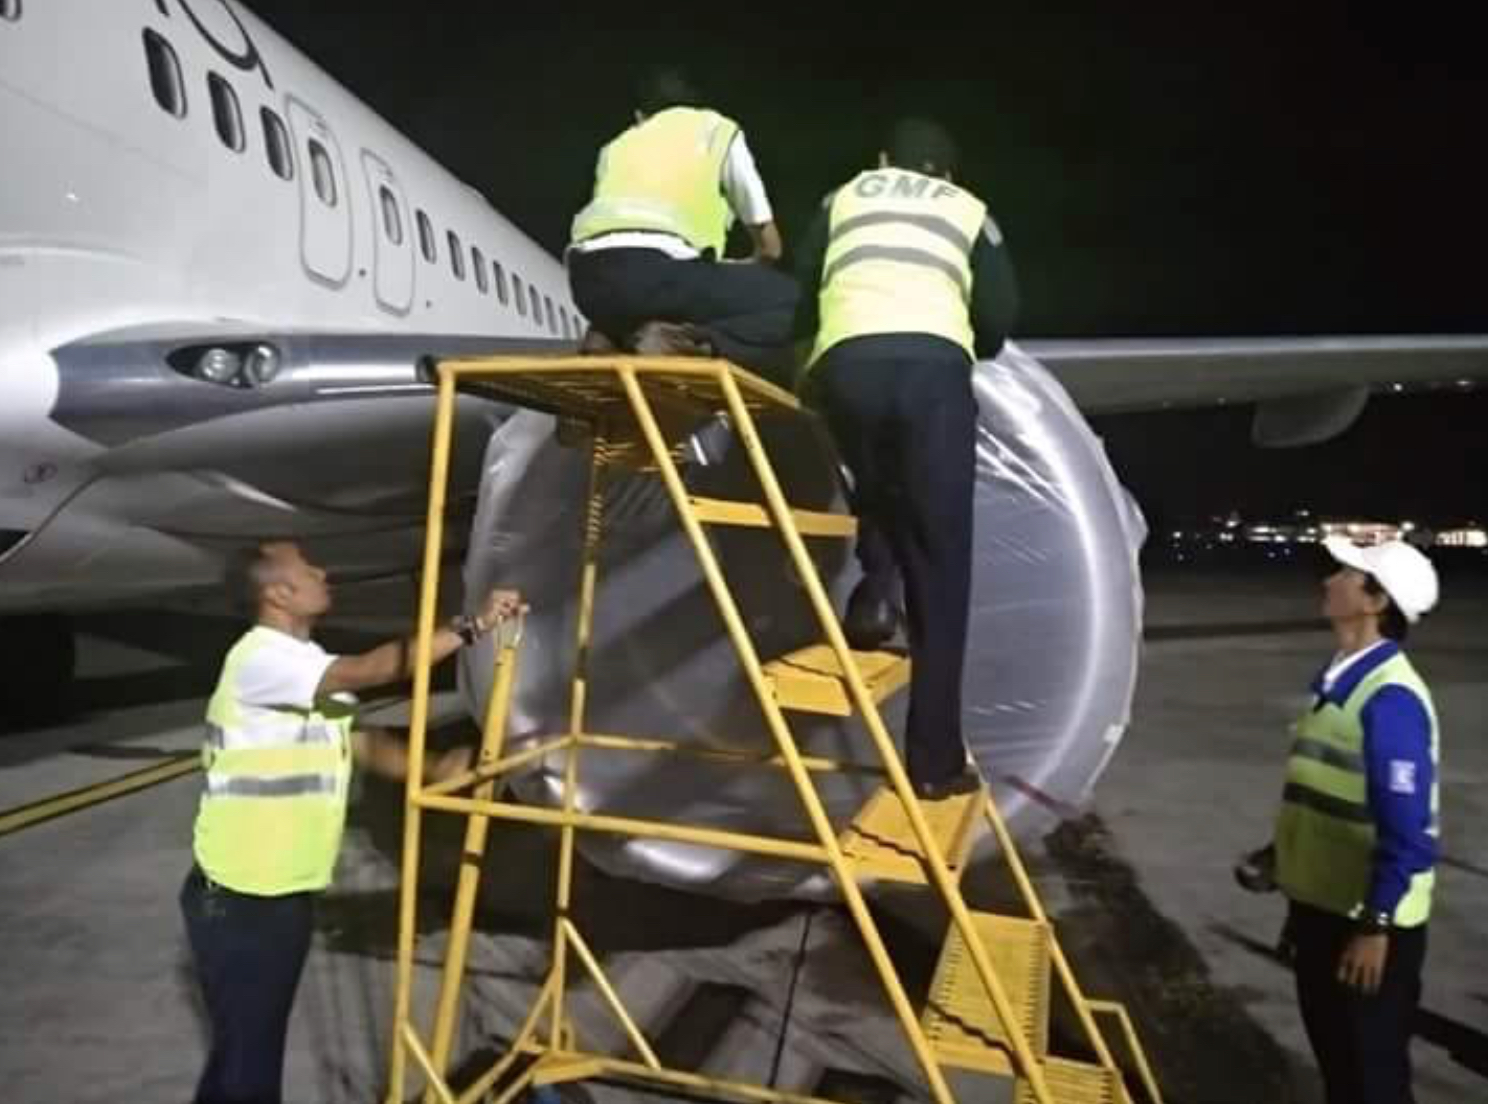 Ground staff secure the plane, anticipating ash fall at Bali’s airport. Photo: BNPB